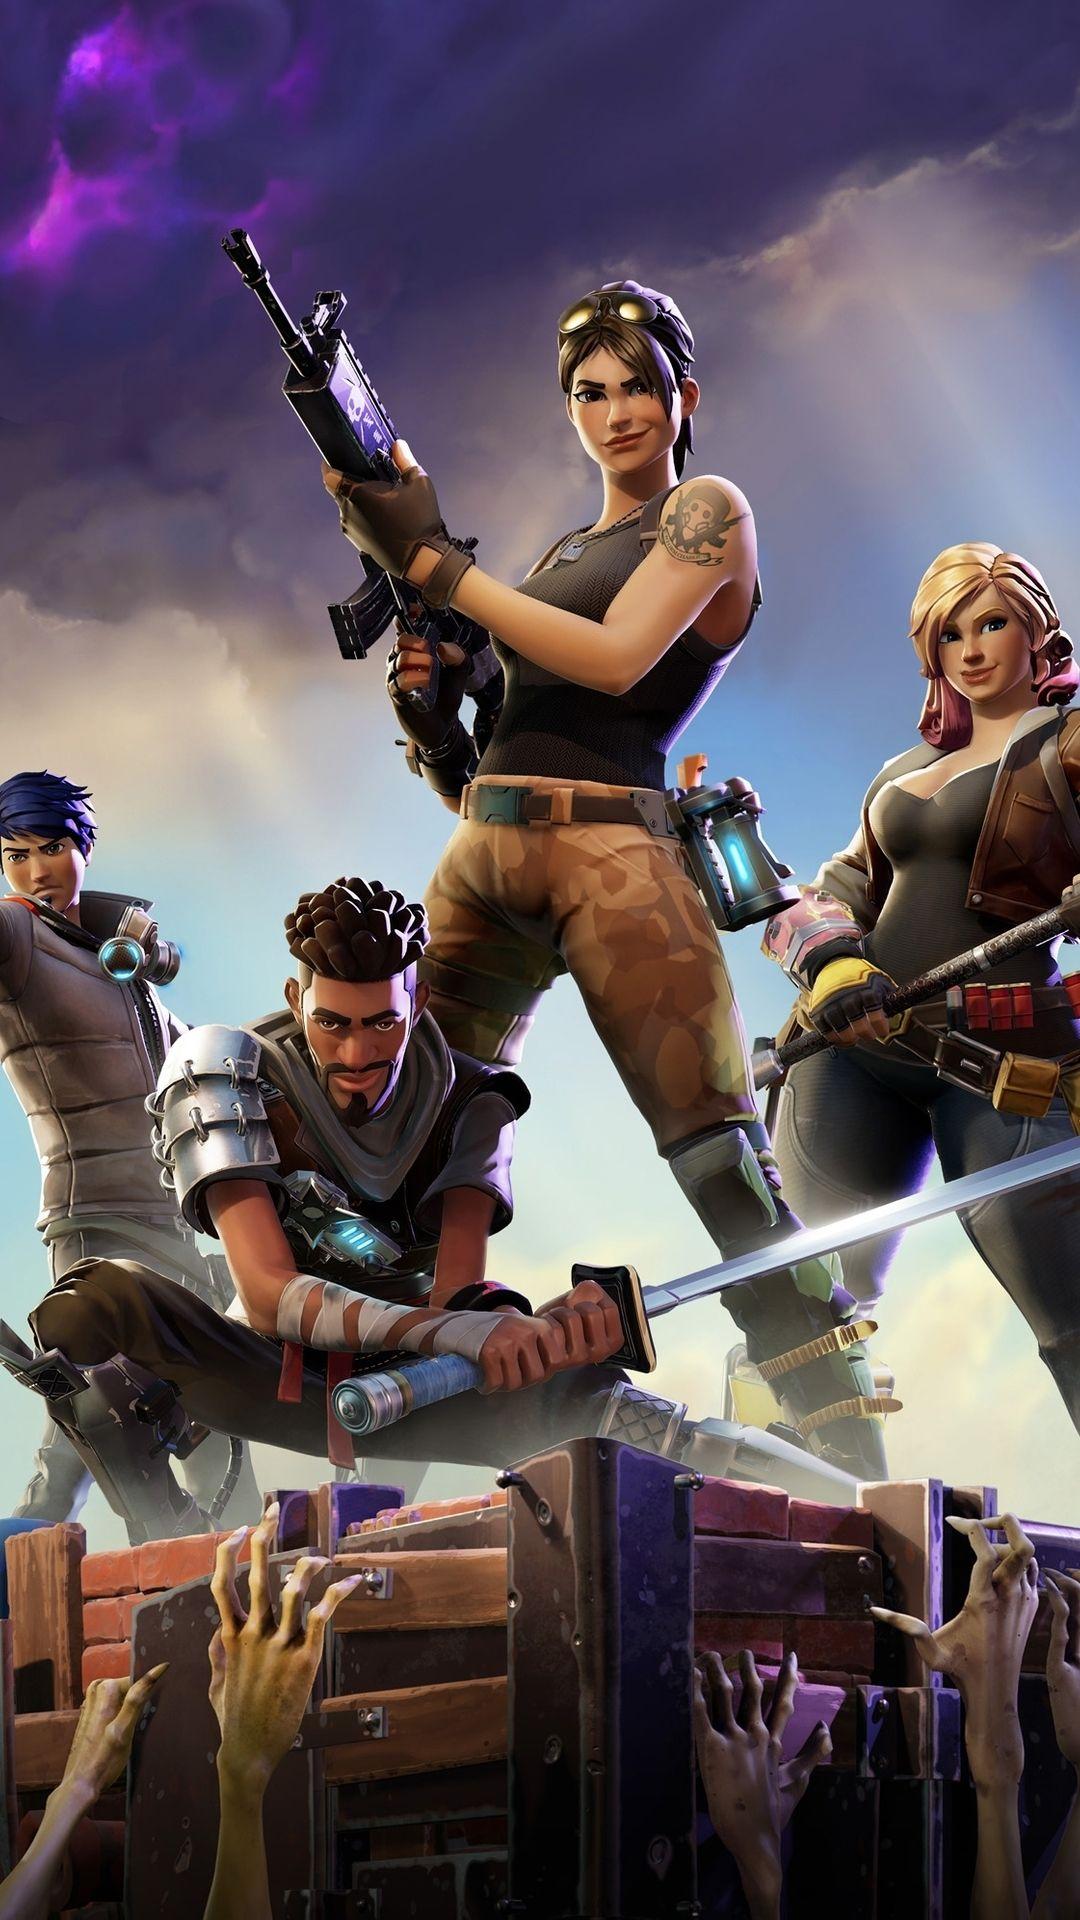 1080 x 1920 · jpeg - Fortnite players - Download 4k wallpapers for iPhone and Android